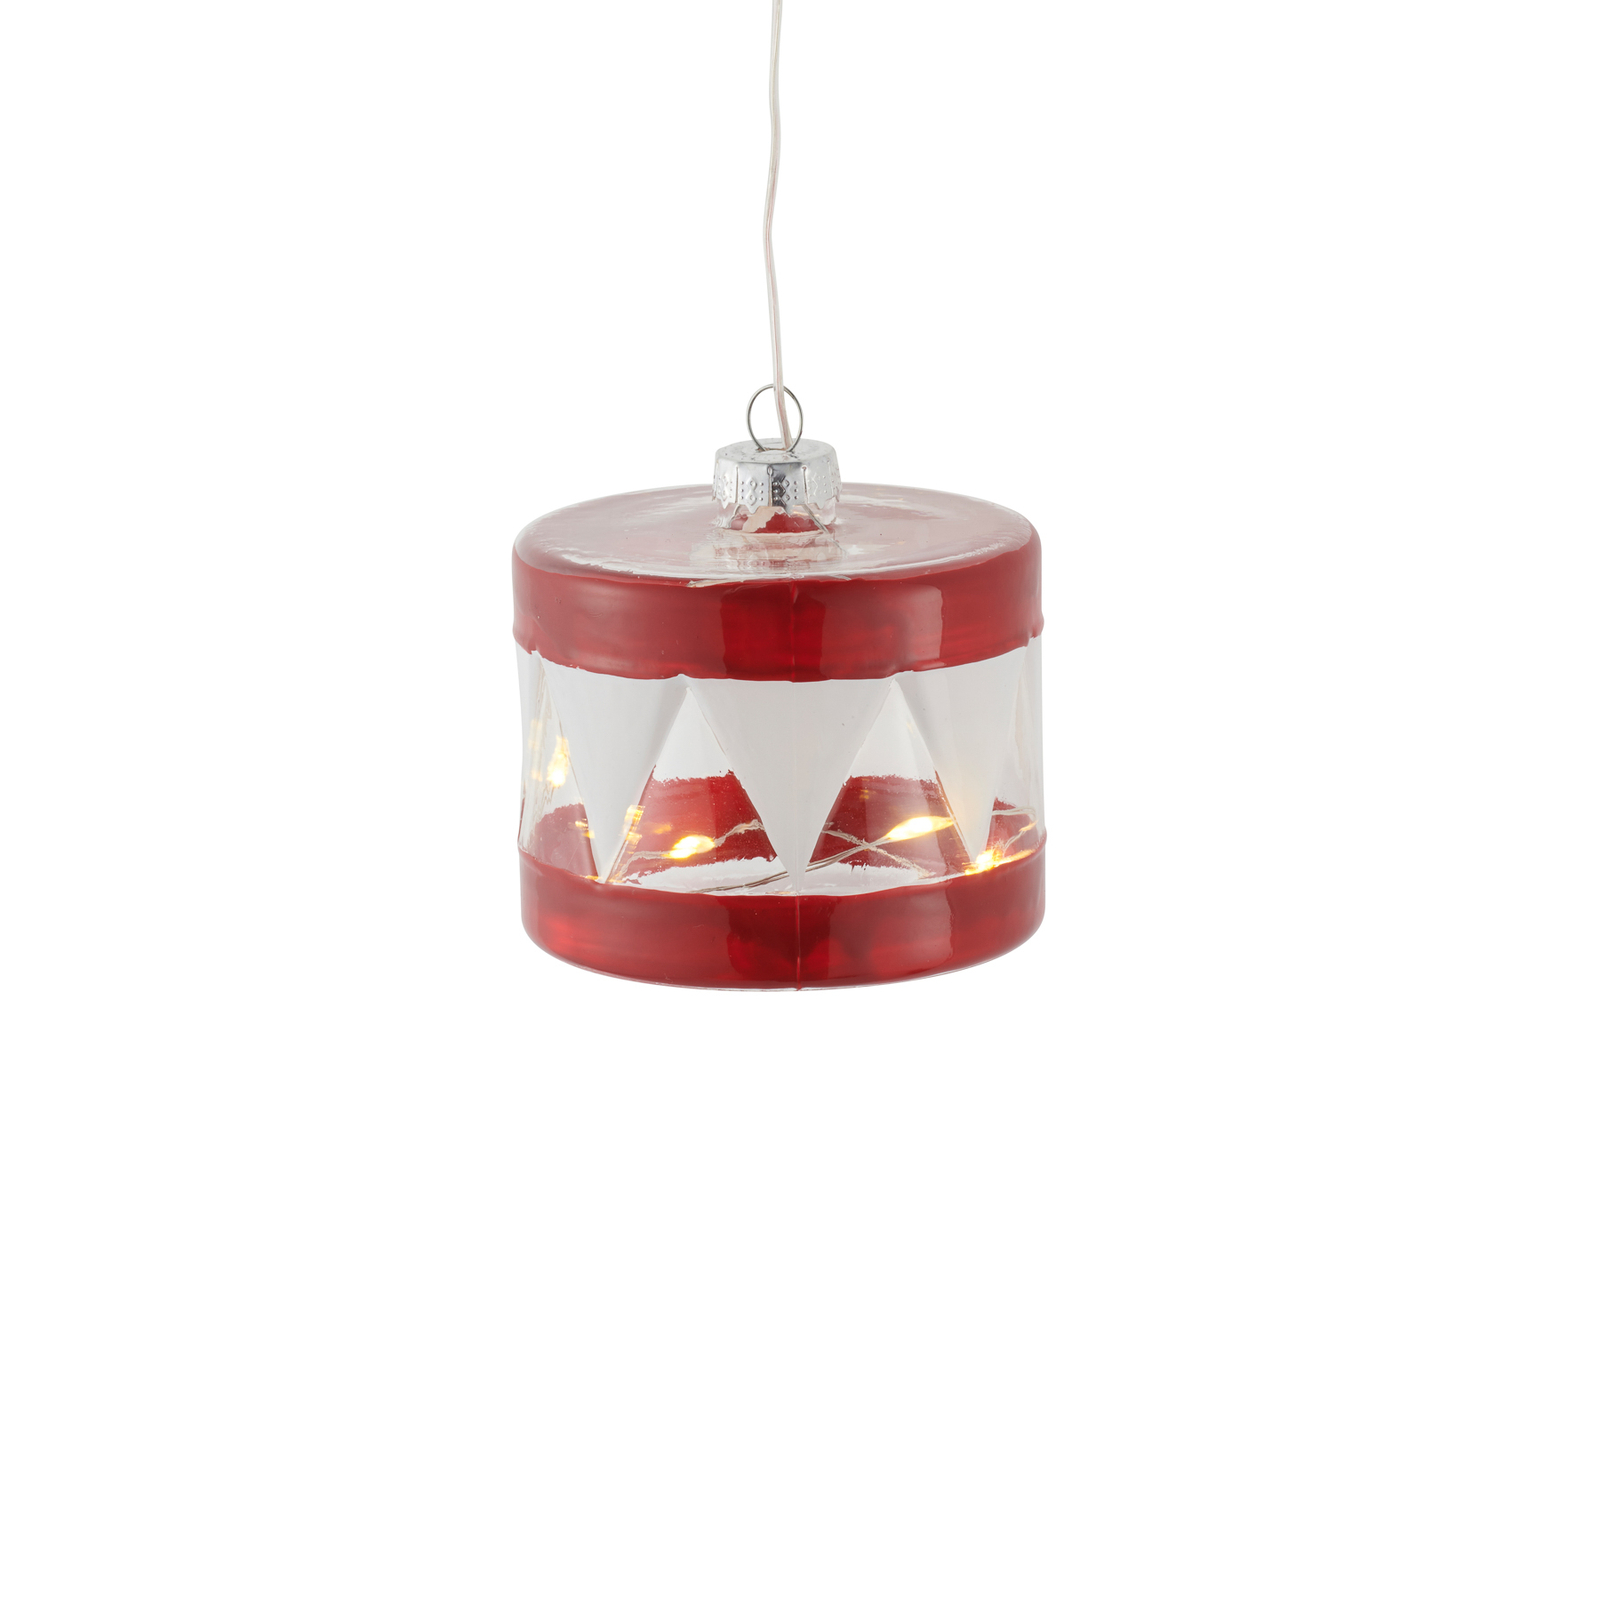 Decorative pendant Elly with LED, Ø 7 cm, red